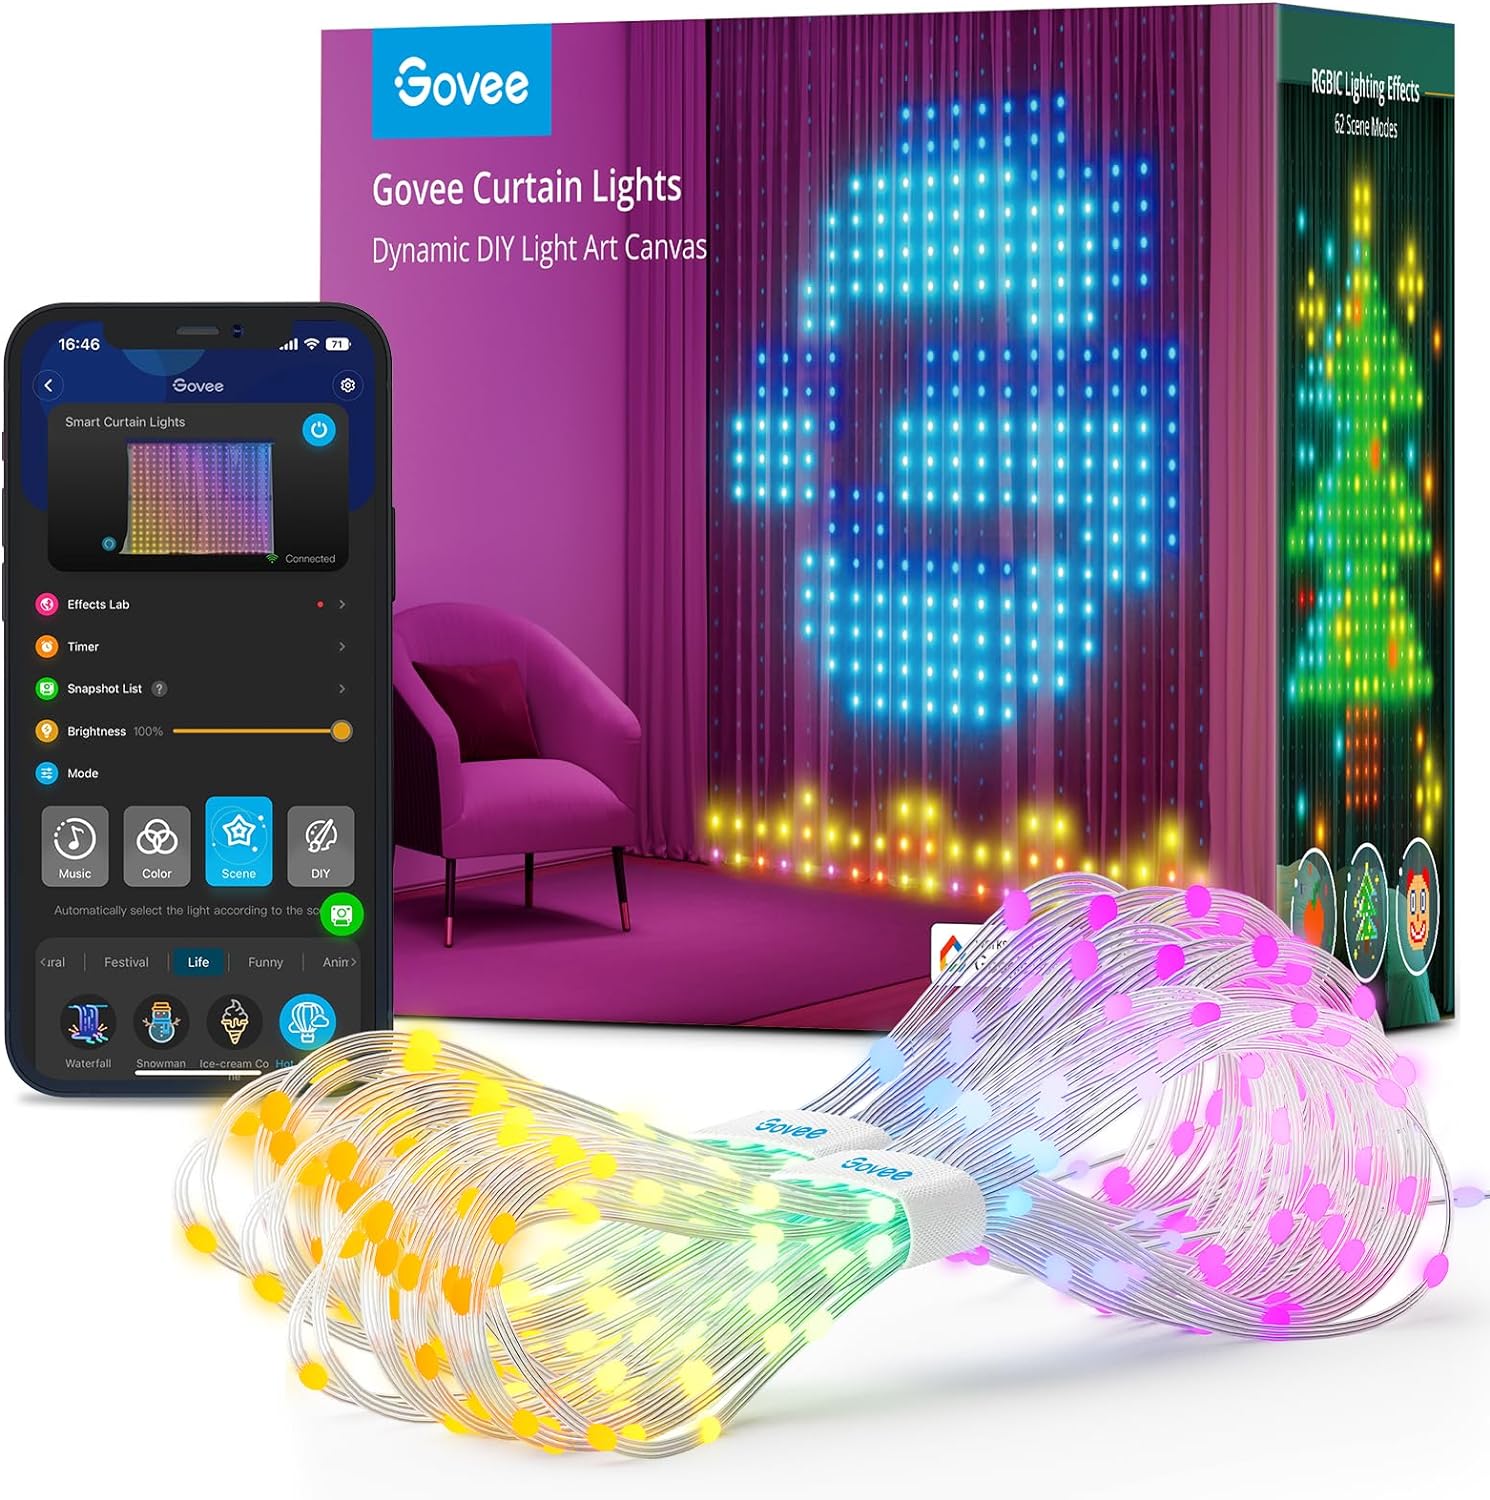 (⭐⭐ HOT SALE NOW) Govee Curtain Lights, Smart LED Curtain Lights, Color Changing Wall Lights